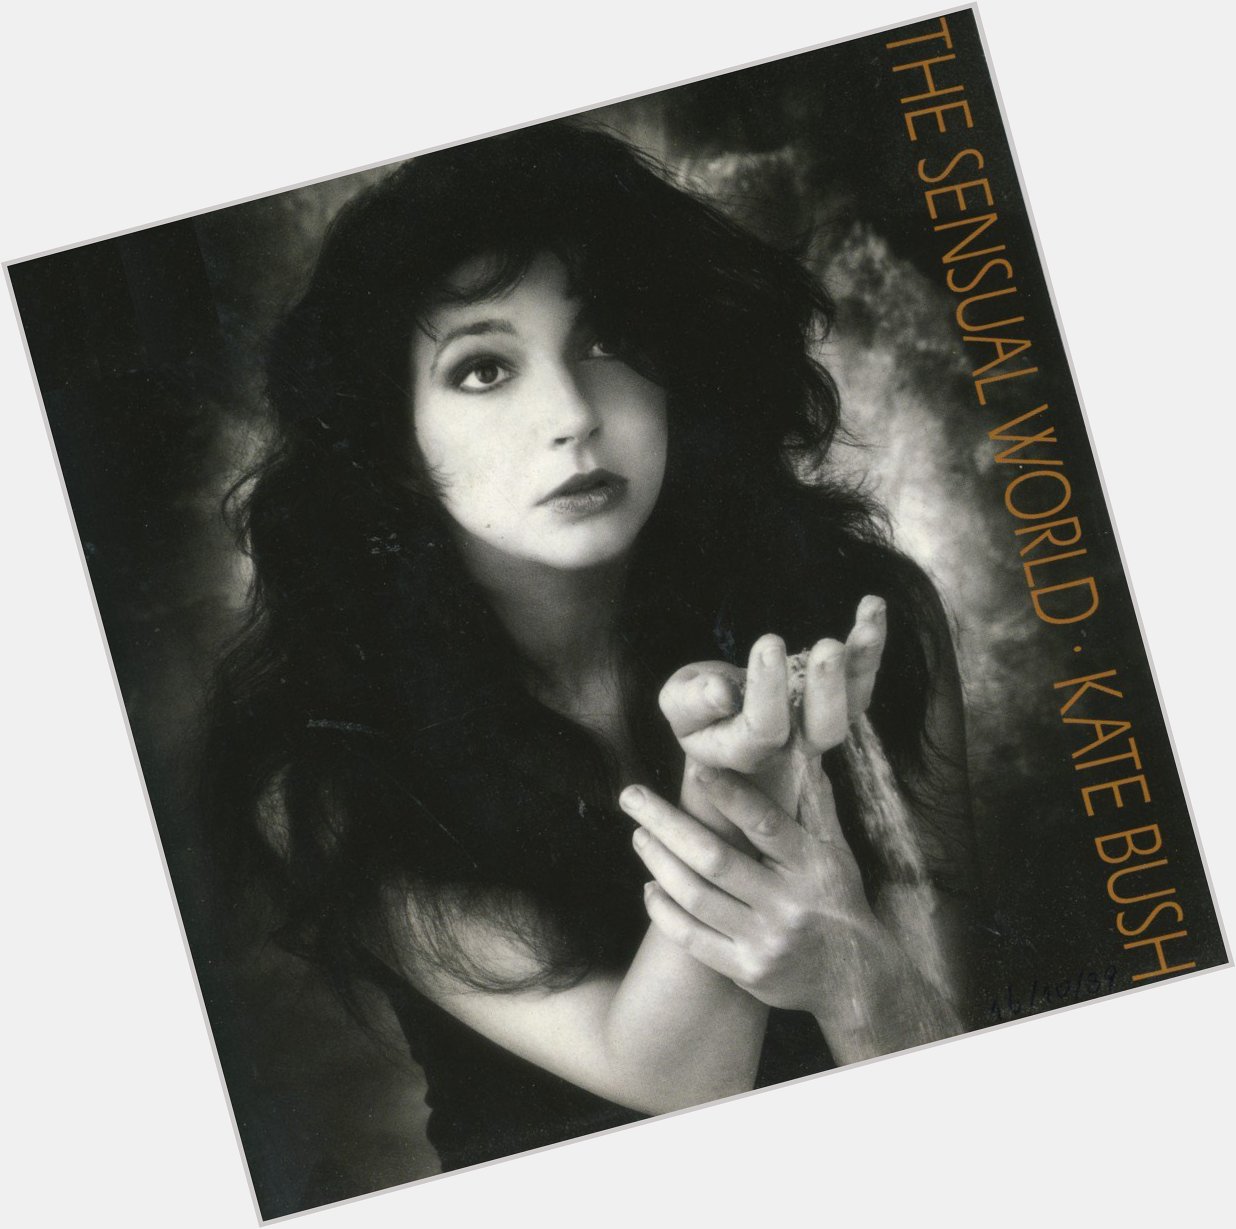 Happy Birthday Kate Bush! We\re listening to one of our favorites, The Sensual World. 